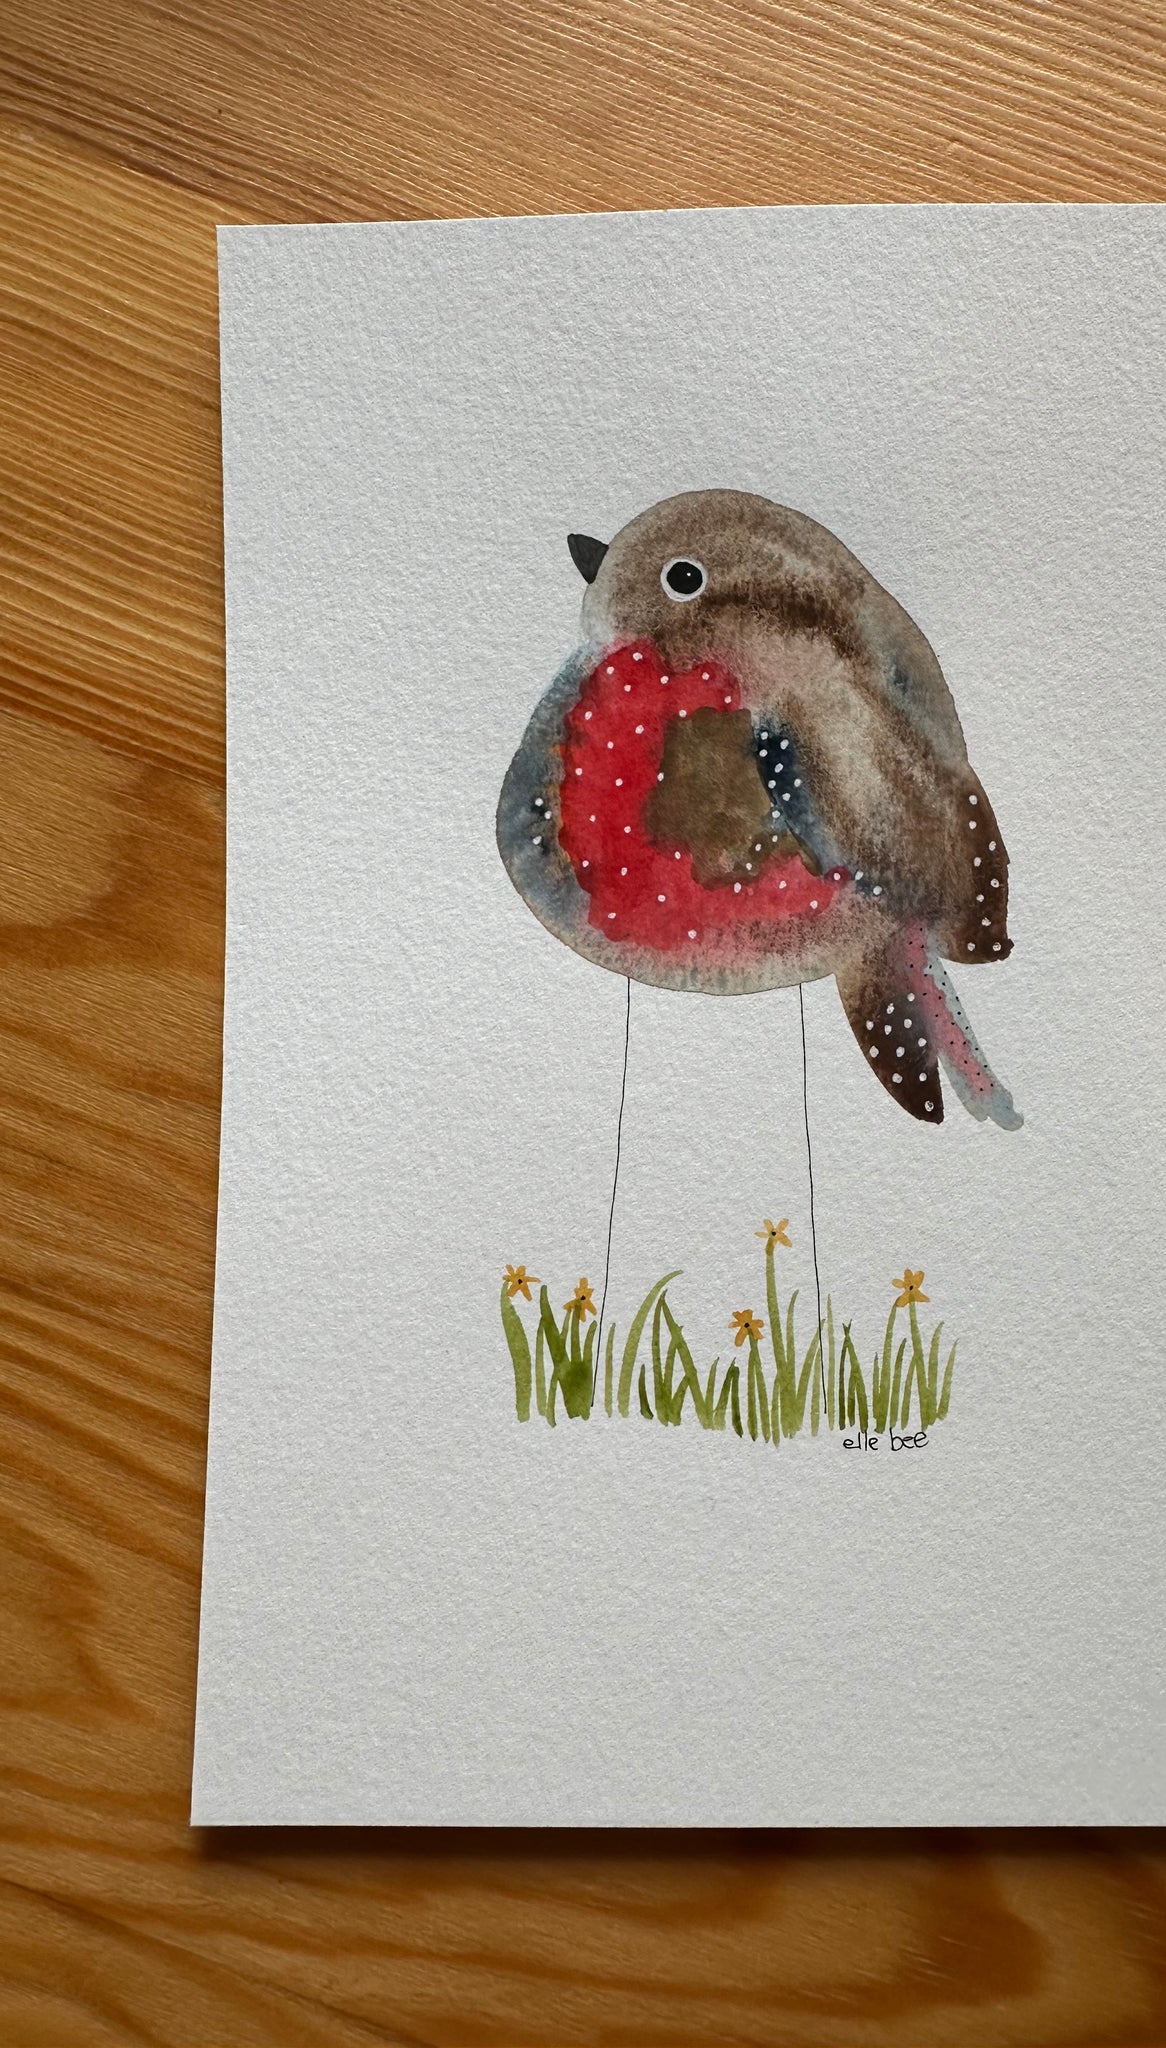 "Red Robin in the Daisies” original watercolour